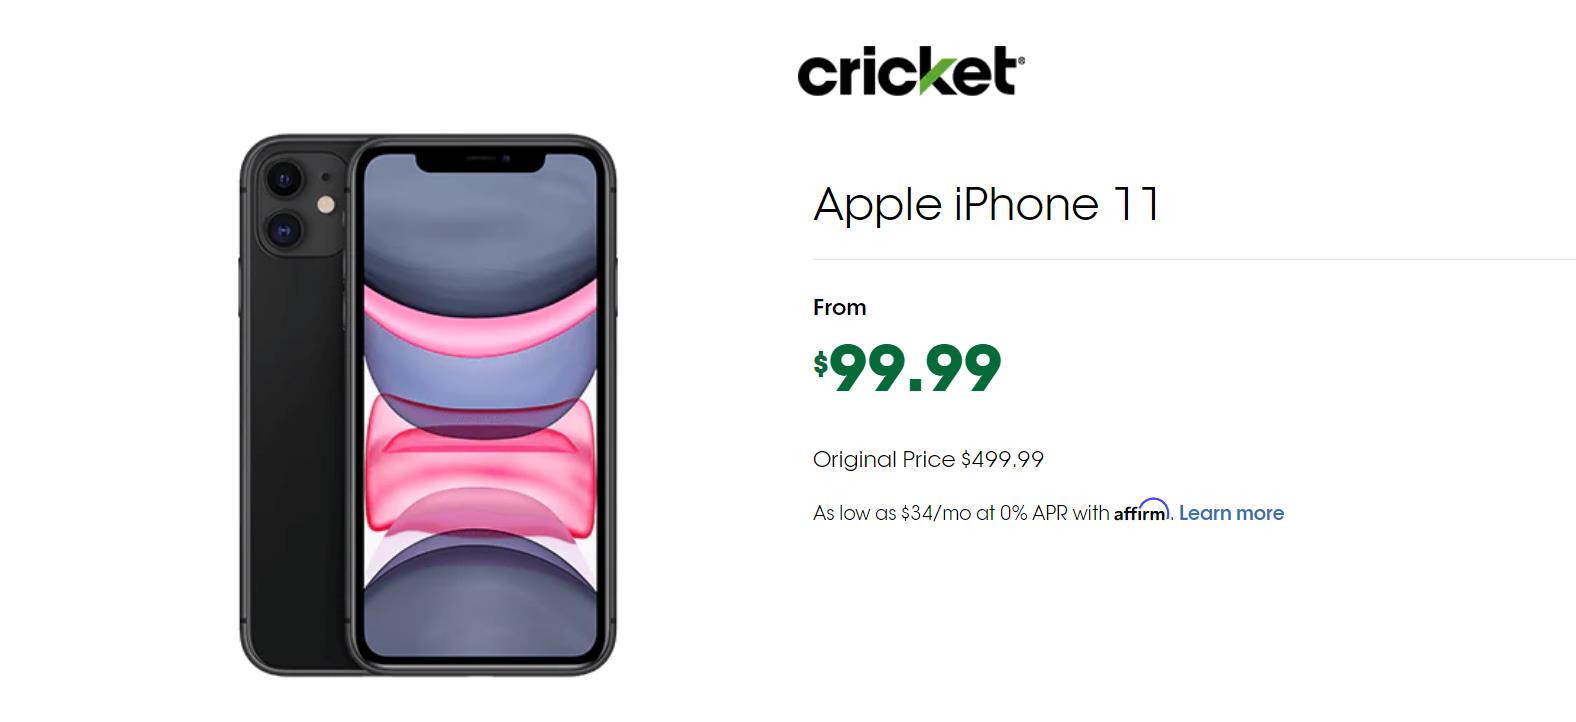 best-cricket-phone-deals-get-an-iphone-11-for-free-and-more